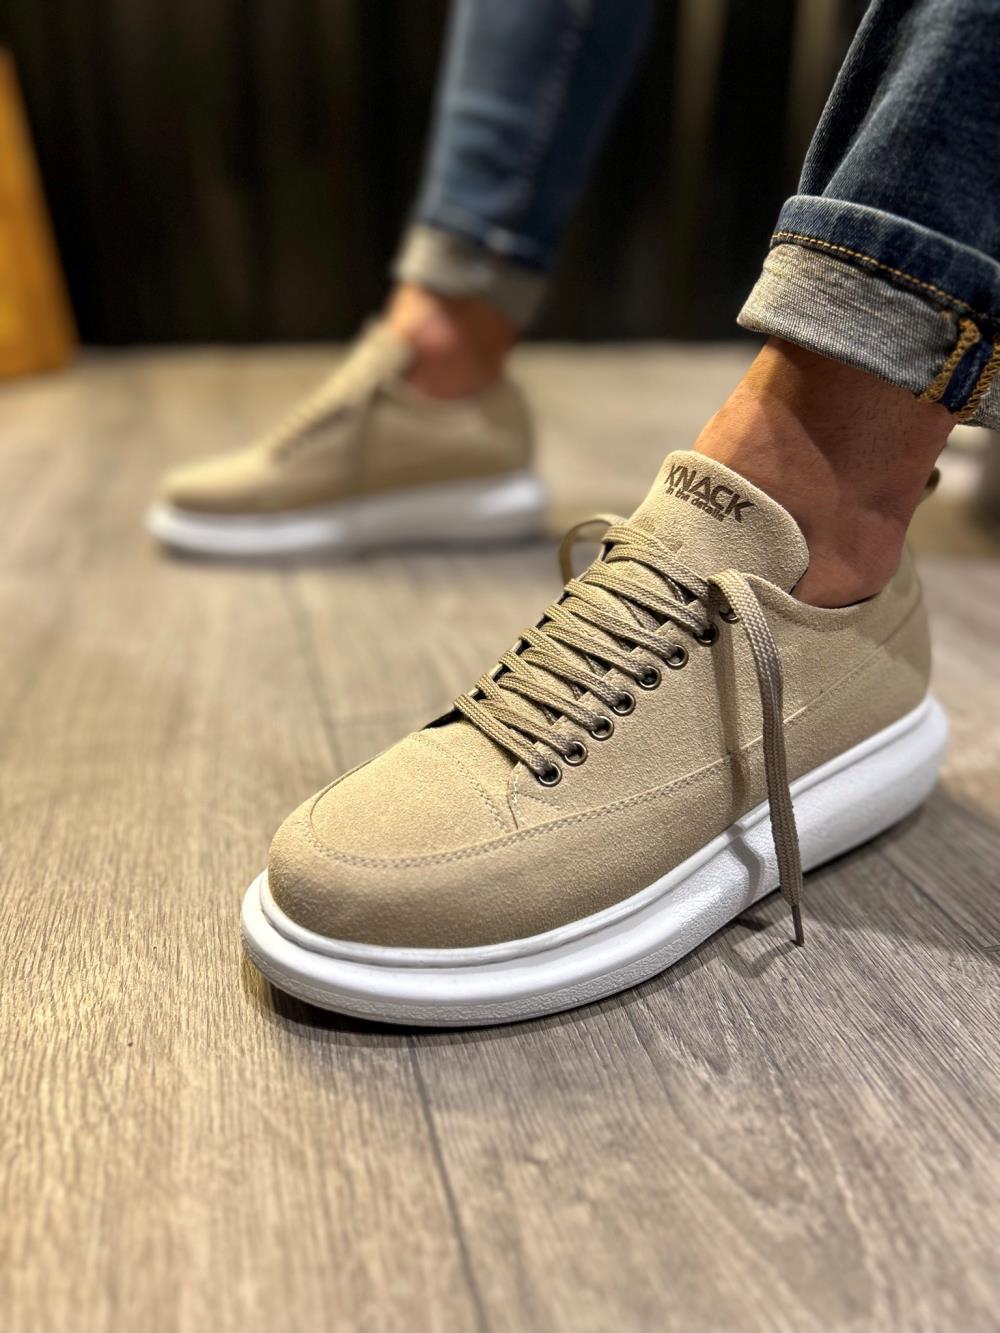 Men's Casual Sneakers Shoes 814 Mink Suede - STREETMODE™